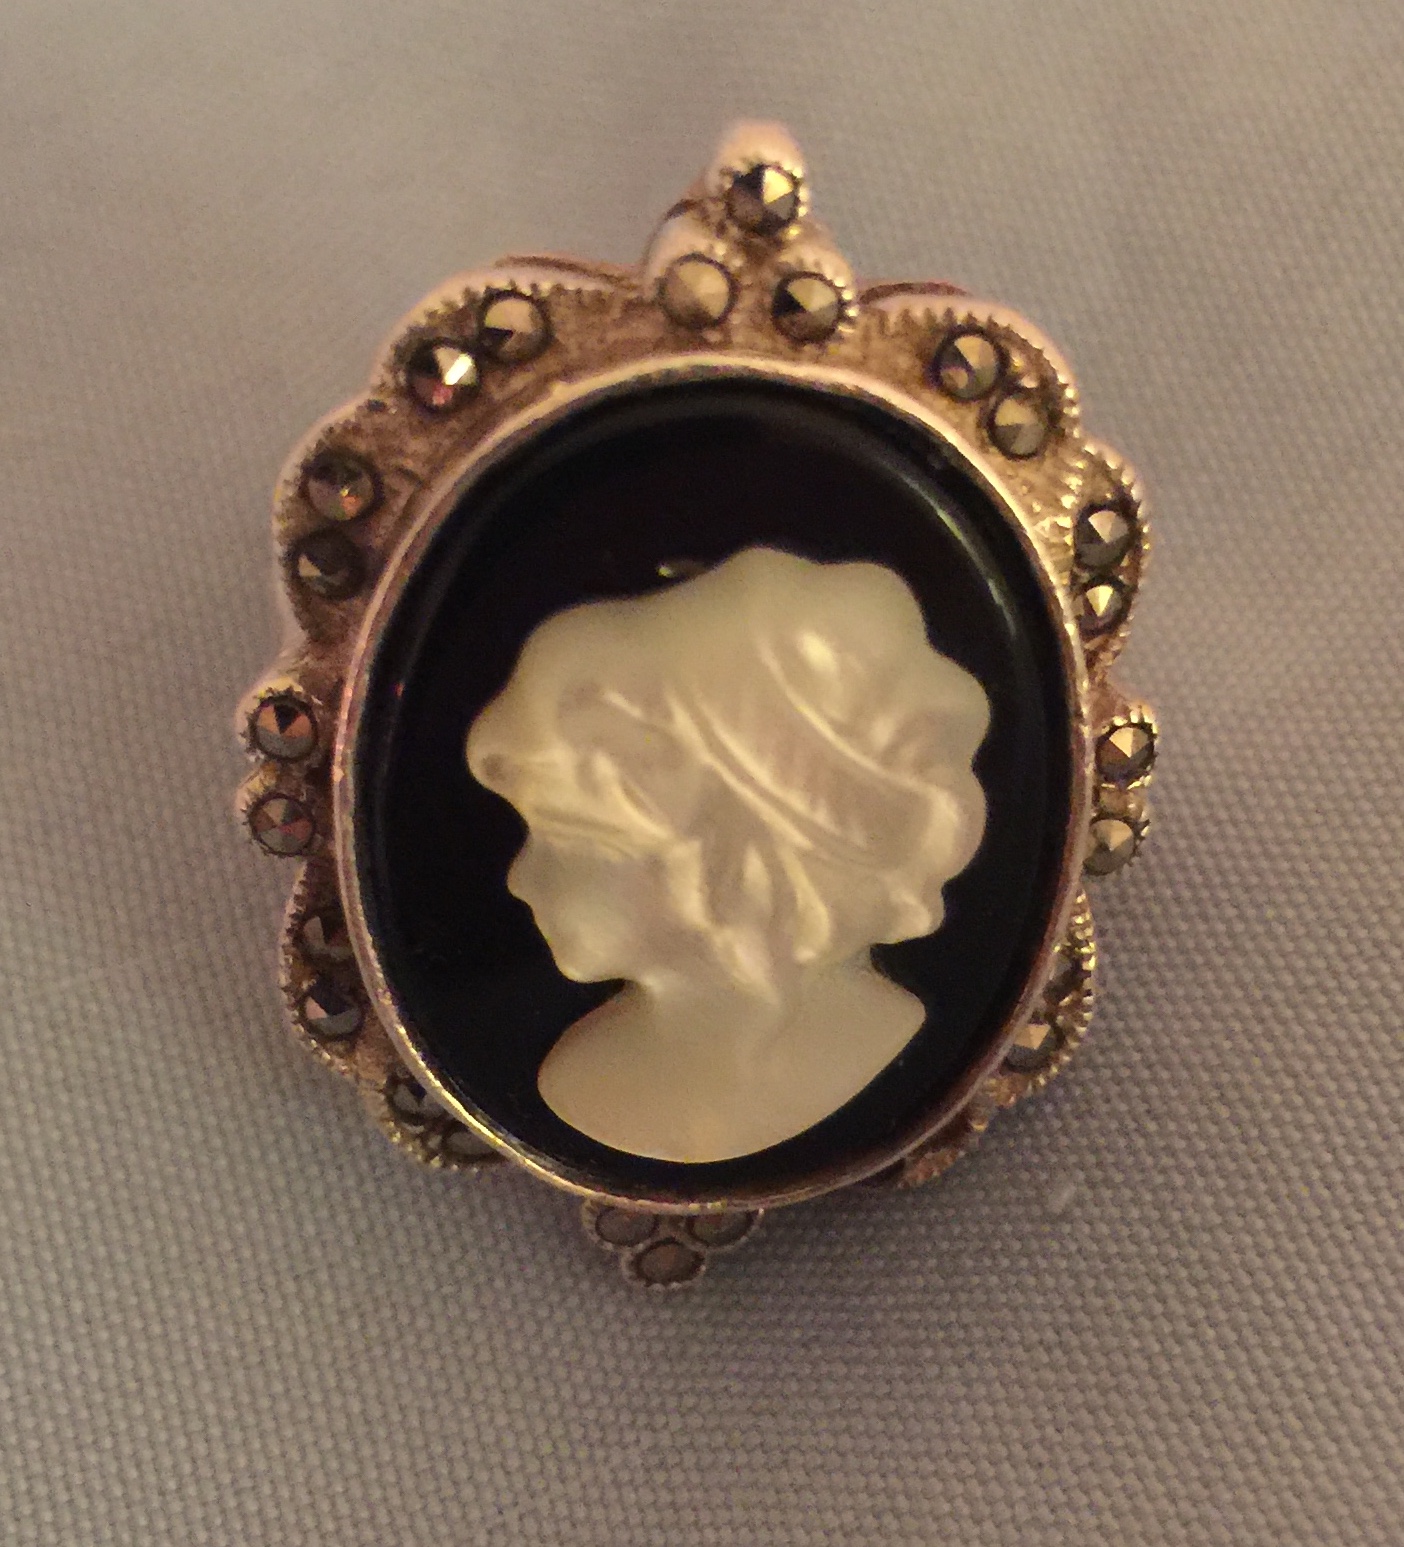 Marking on my cameo ring? Can’t make it out....need help | Antiques Board